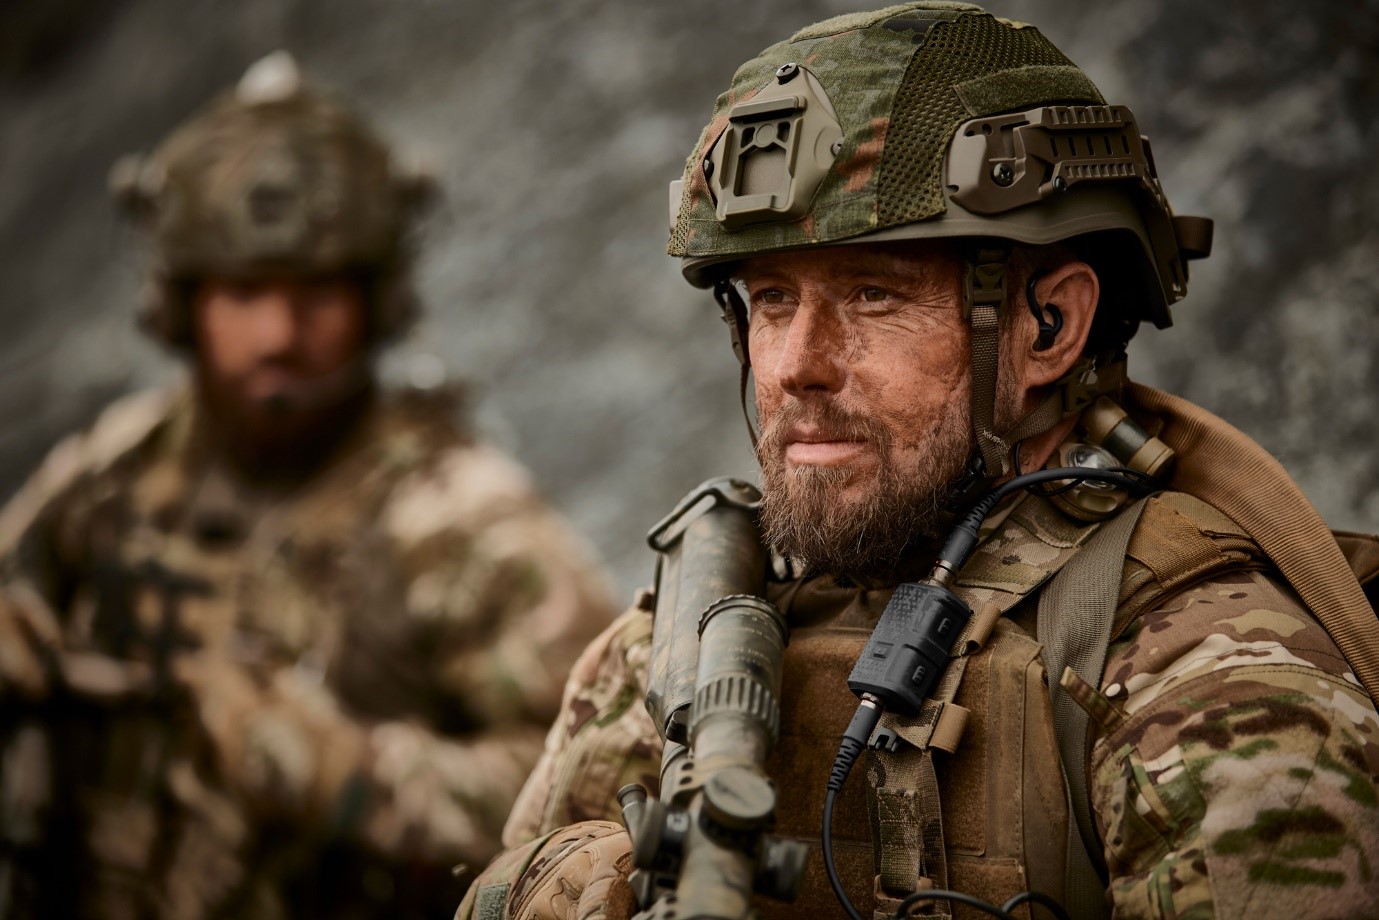 Solider equipped with tactical radio. Photo: Thales